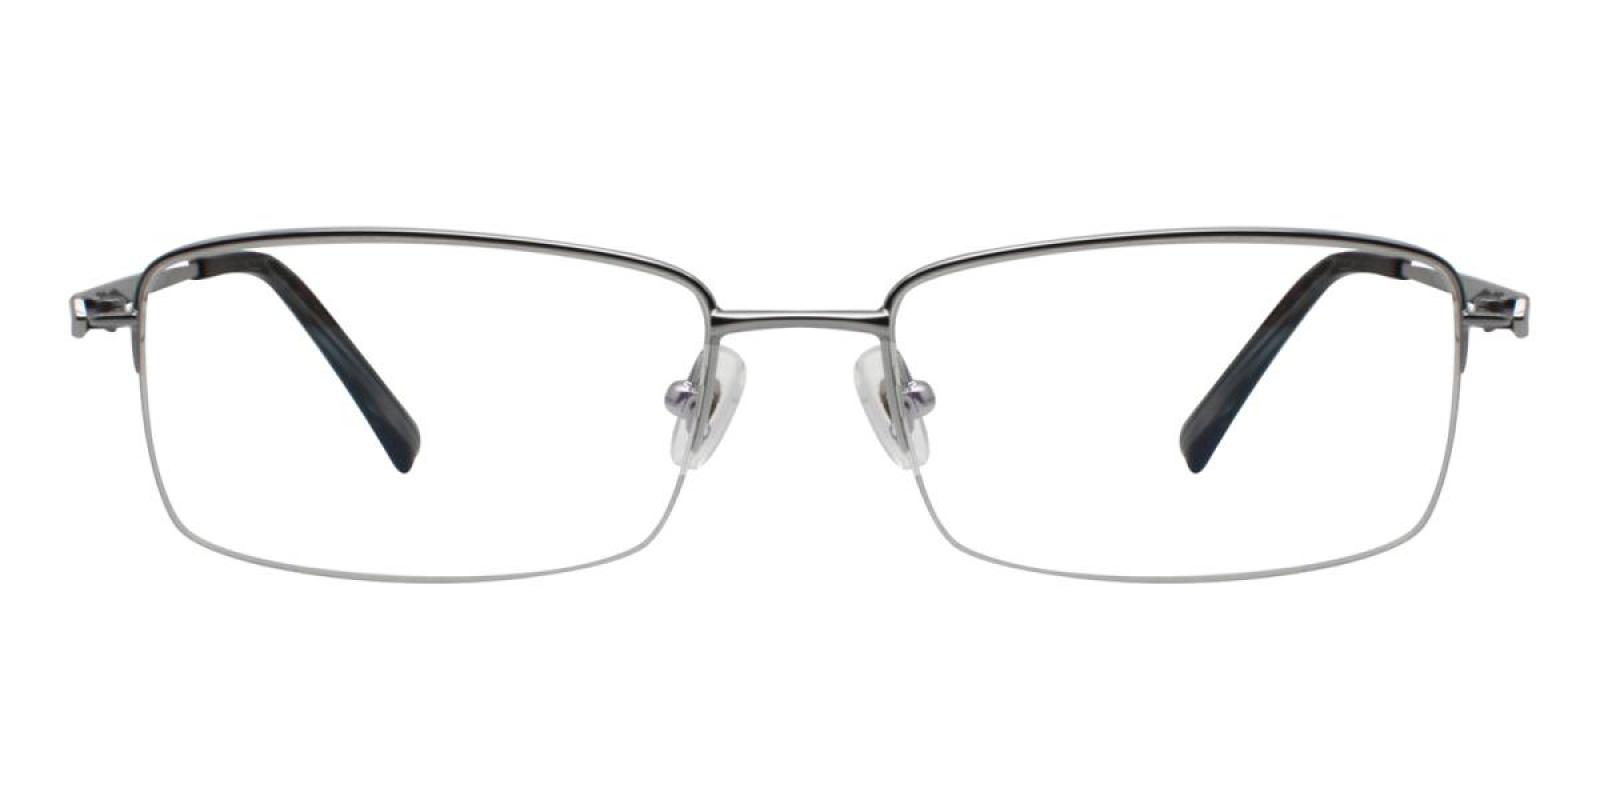 Oliv Rectangle Eyeglasses in Silver - Sllac